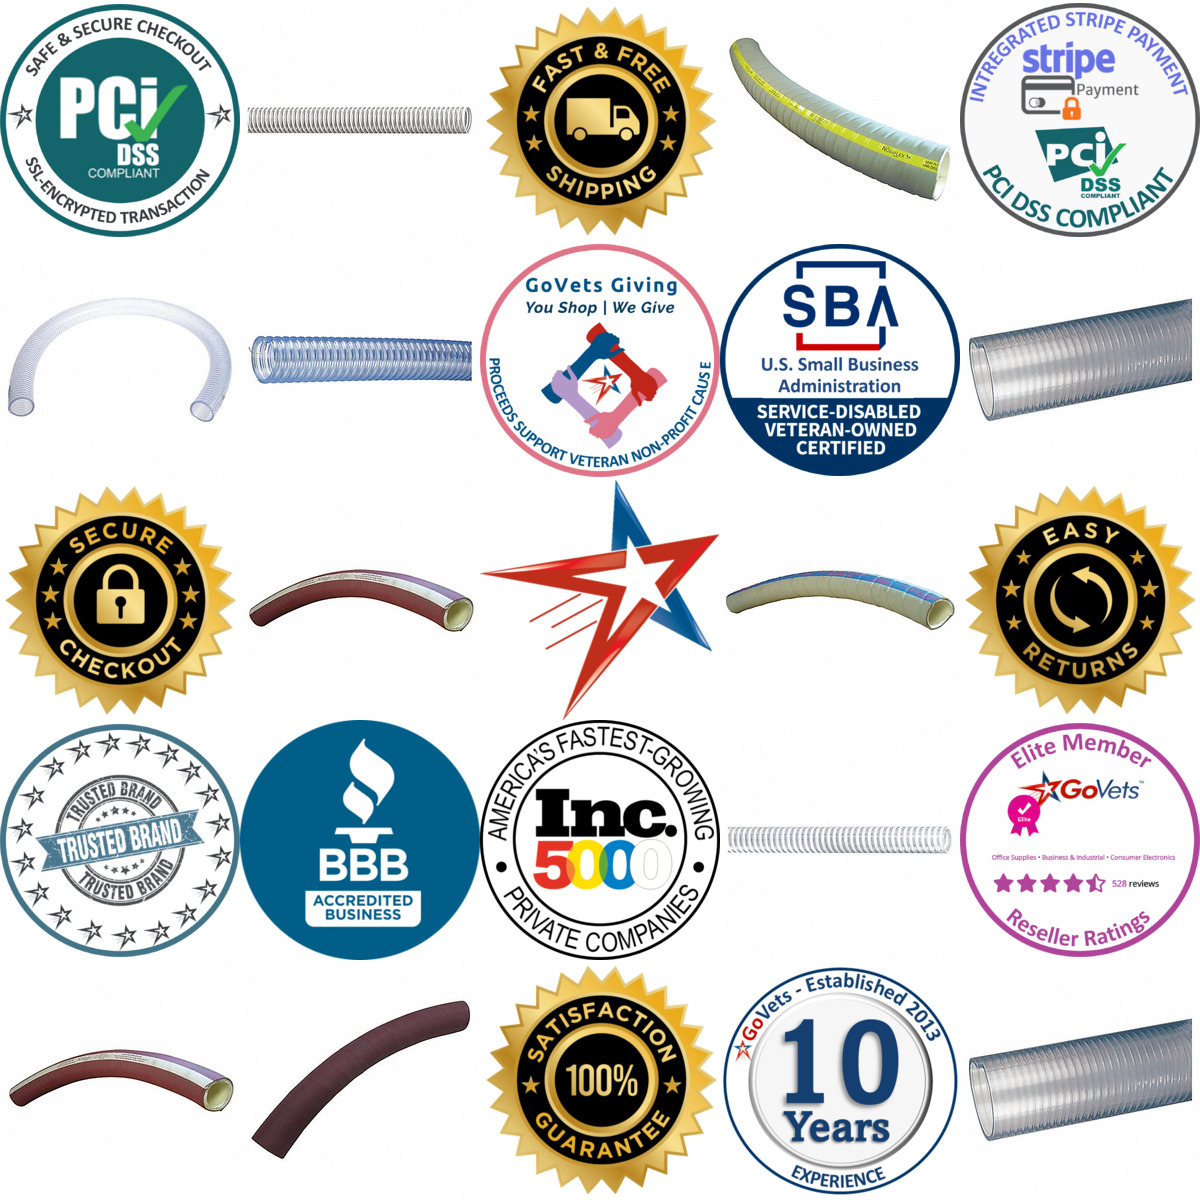 A selection of Bulk Food Grade Hoses products on GoVets